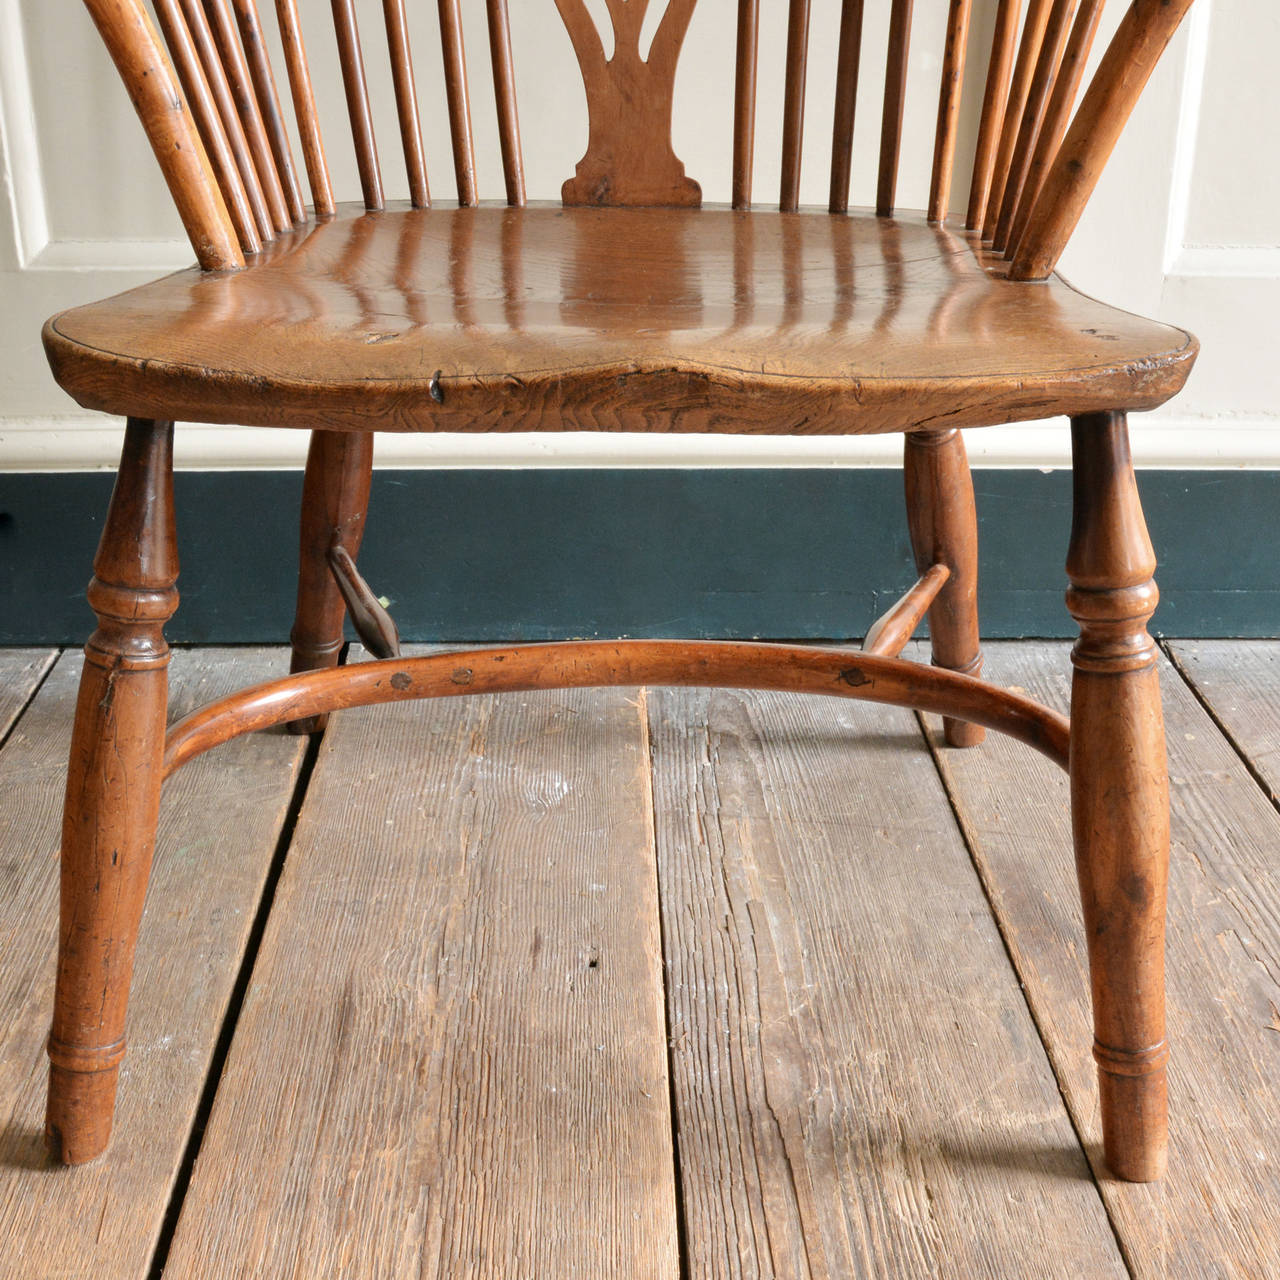 Yew and Elm WIndsor Chair 1